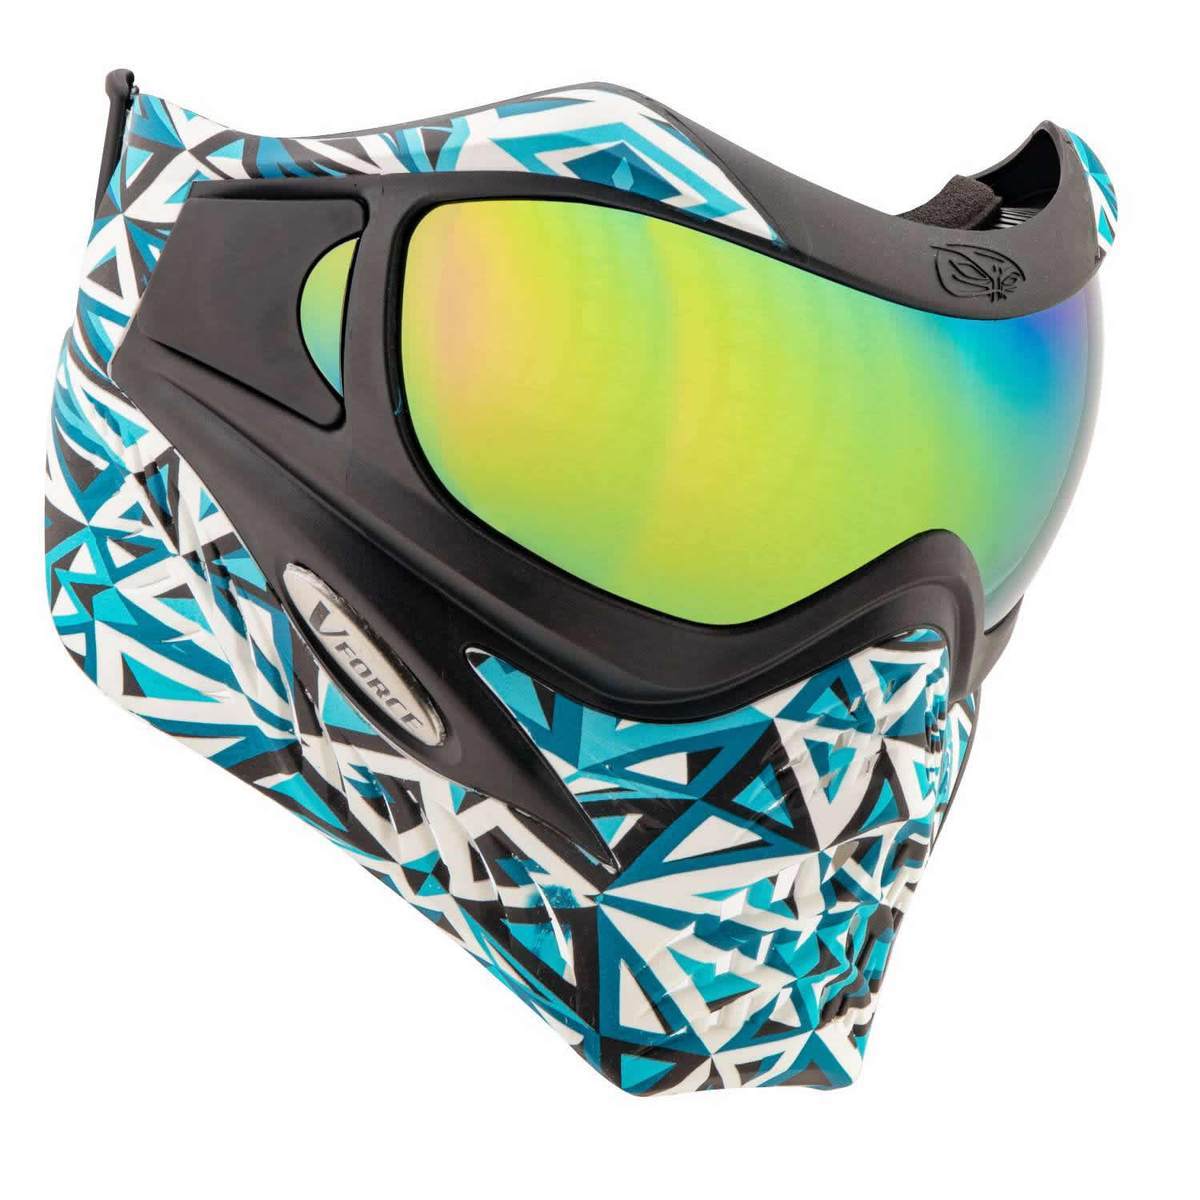 VForce Grill SE Angler Aqua w/ Phantom Lens (Blk/Teal/White) - Eminent Paintball And Airsoft